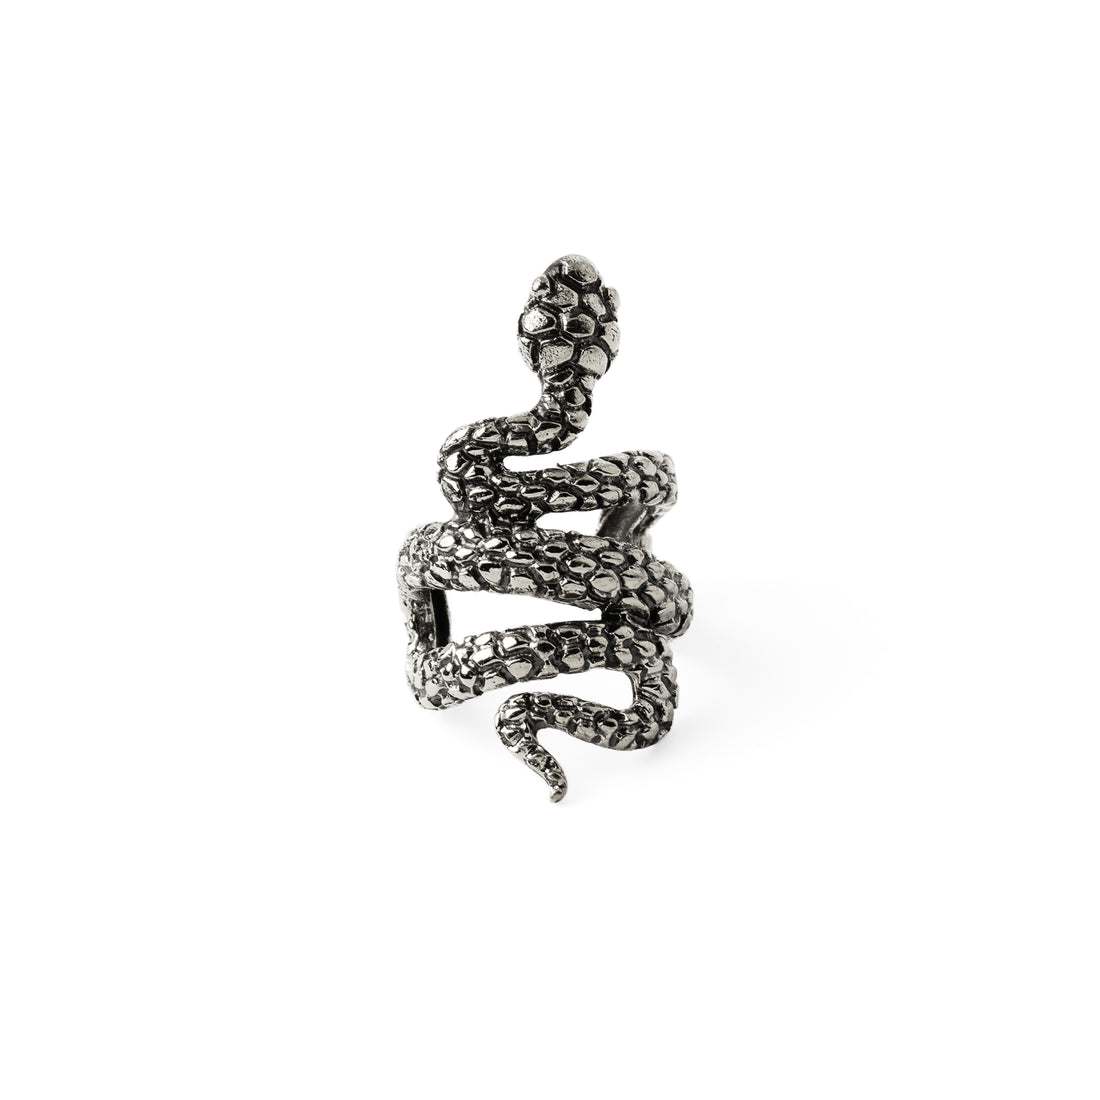 Serpent Ear Cuff frontal view